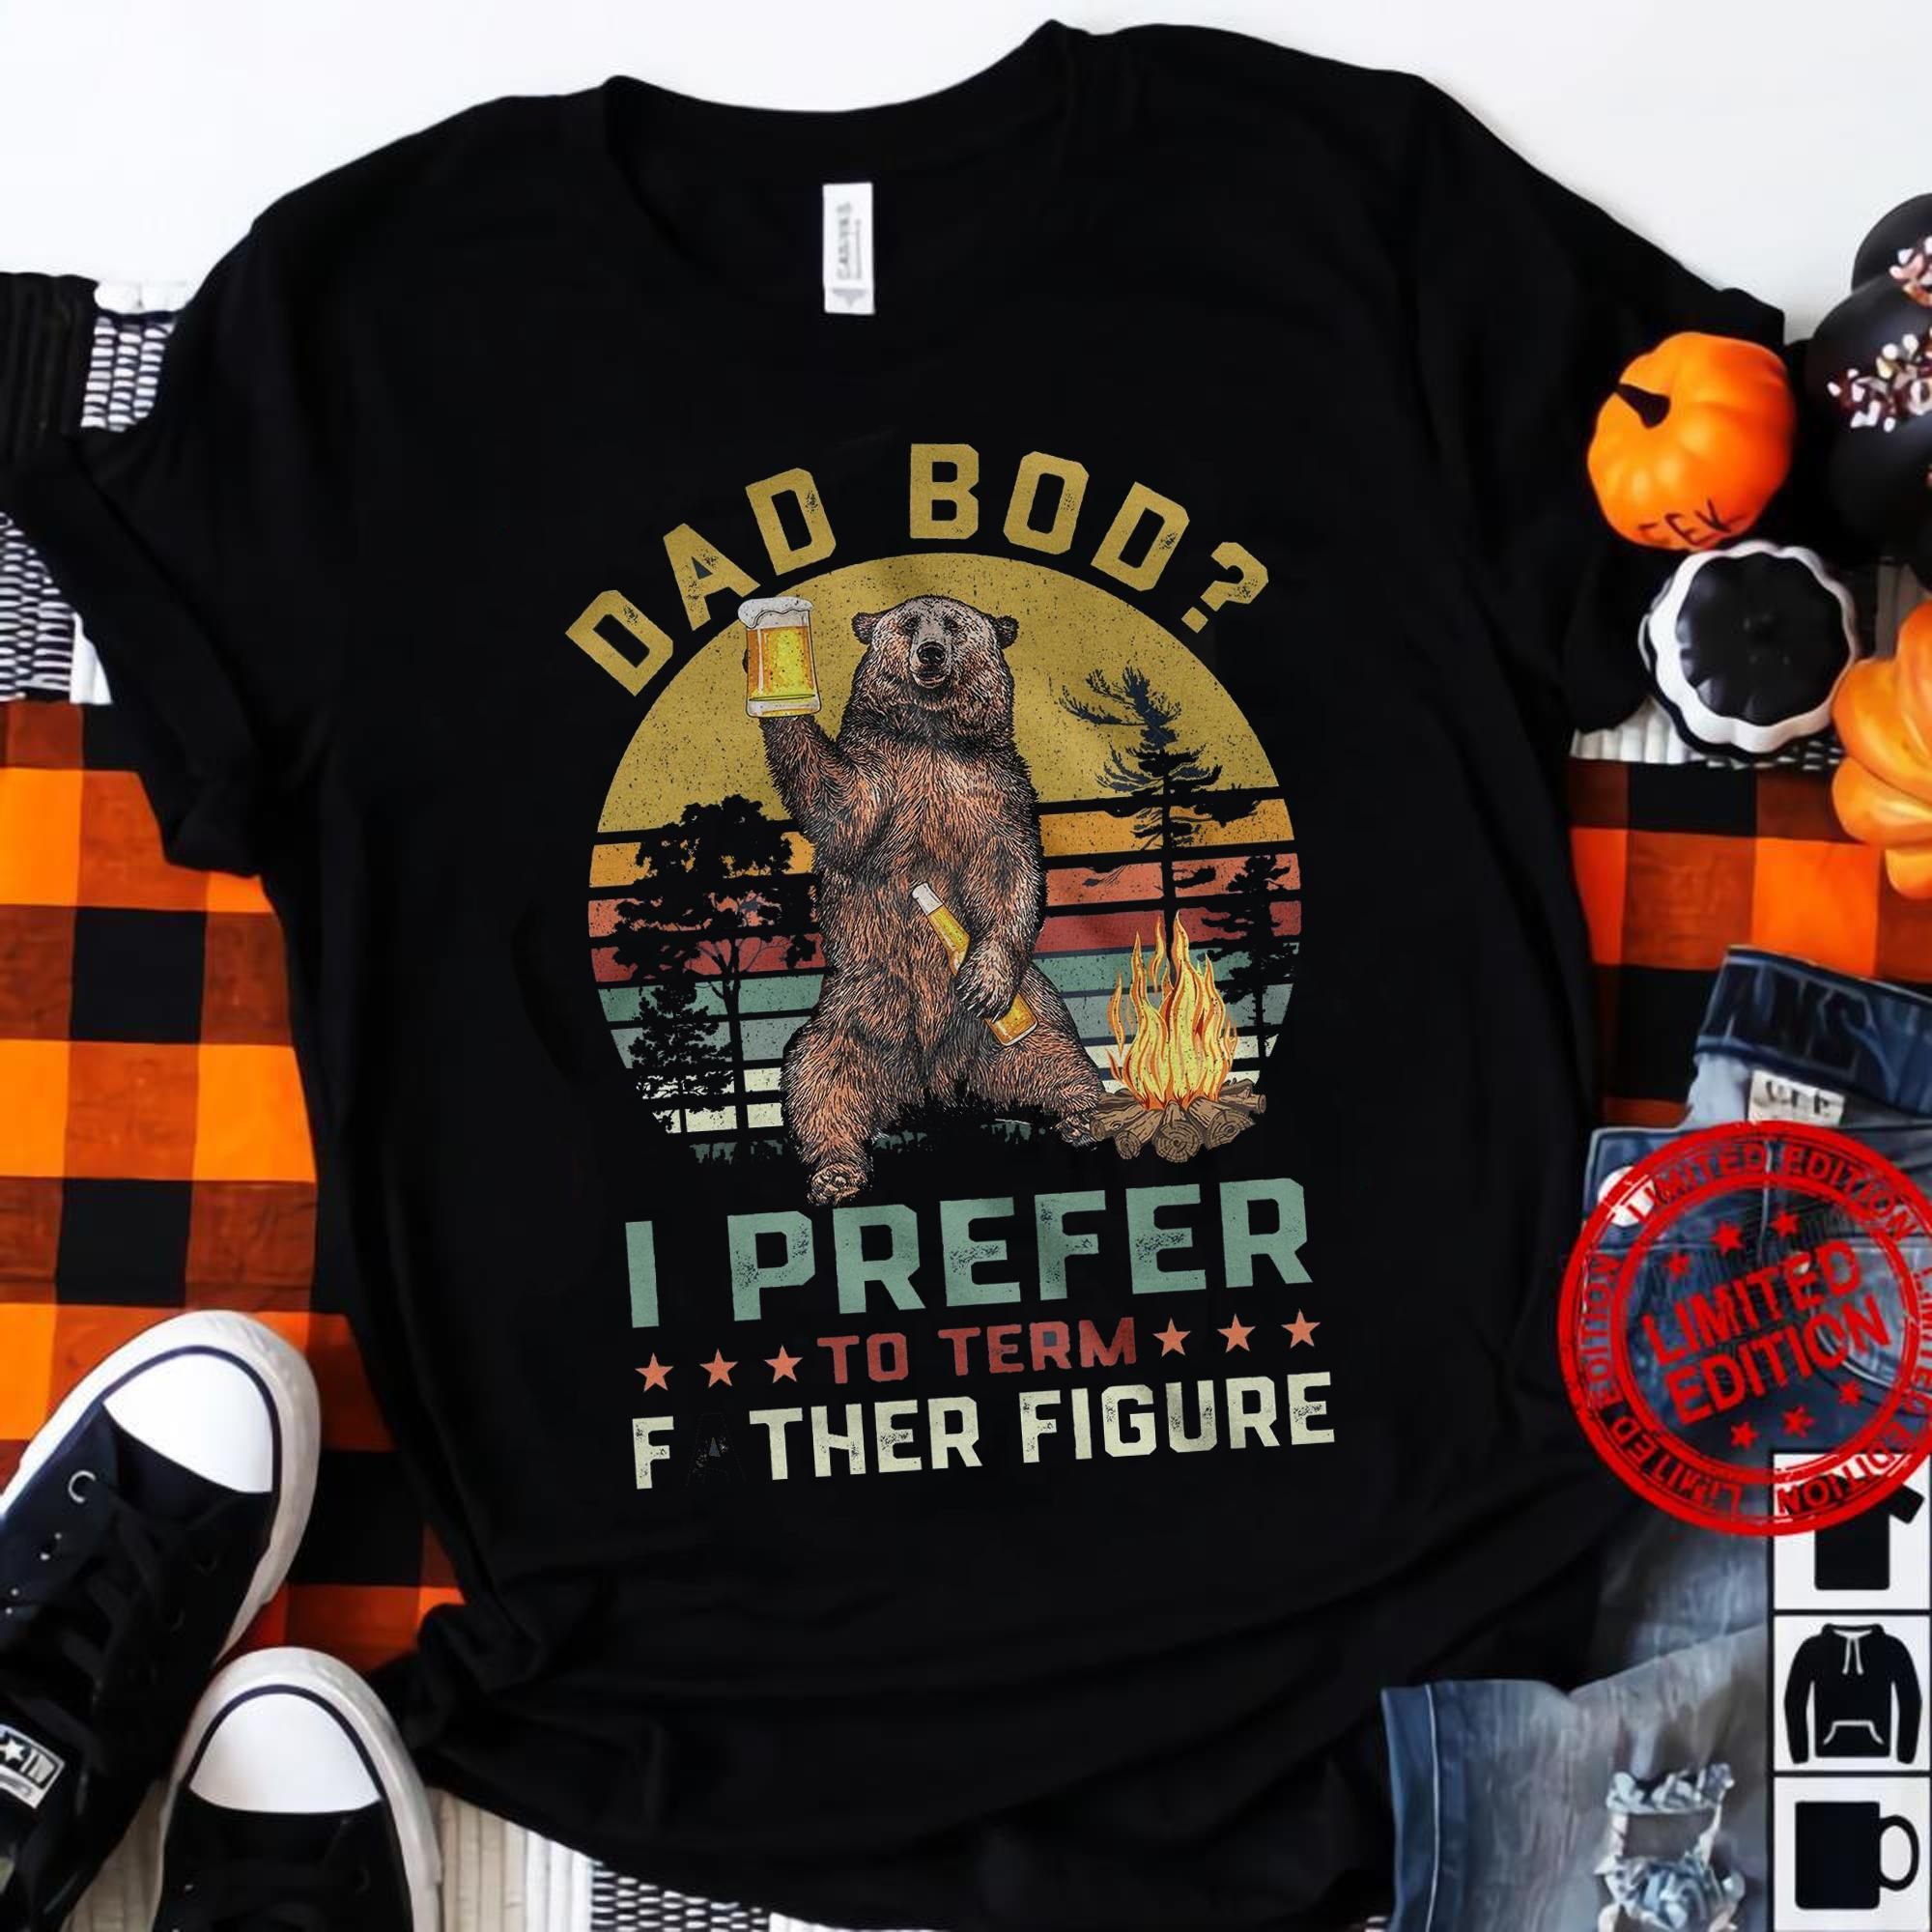 Dad Bod I Prefer To Term Father Figure Unisex T Shirt  K1929